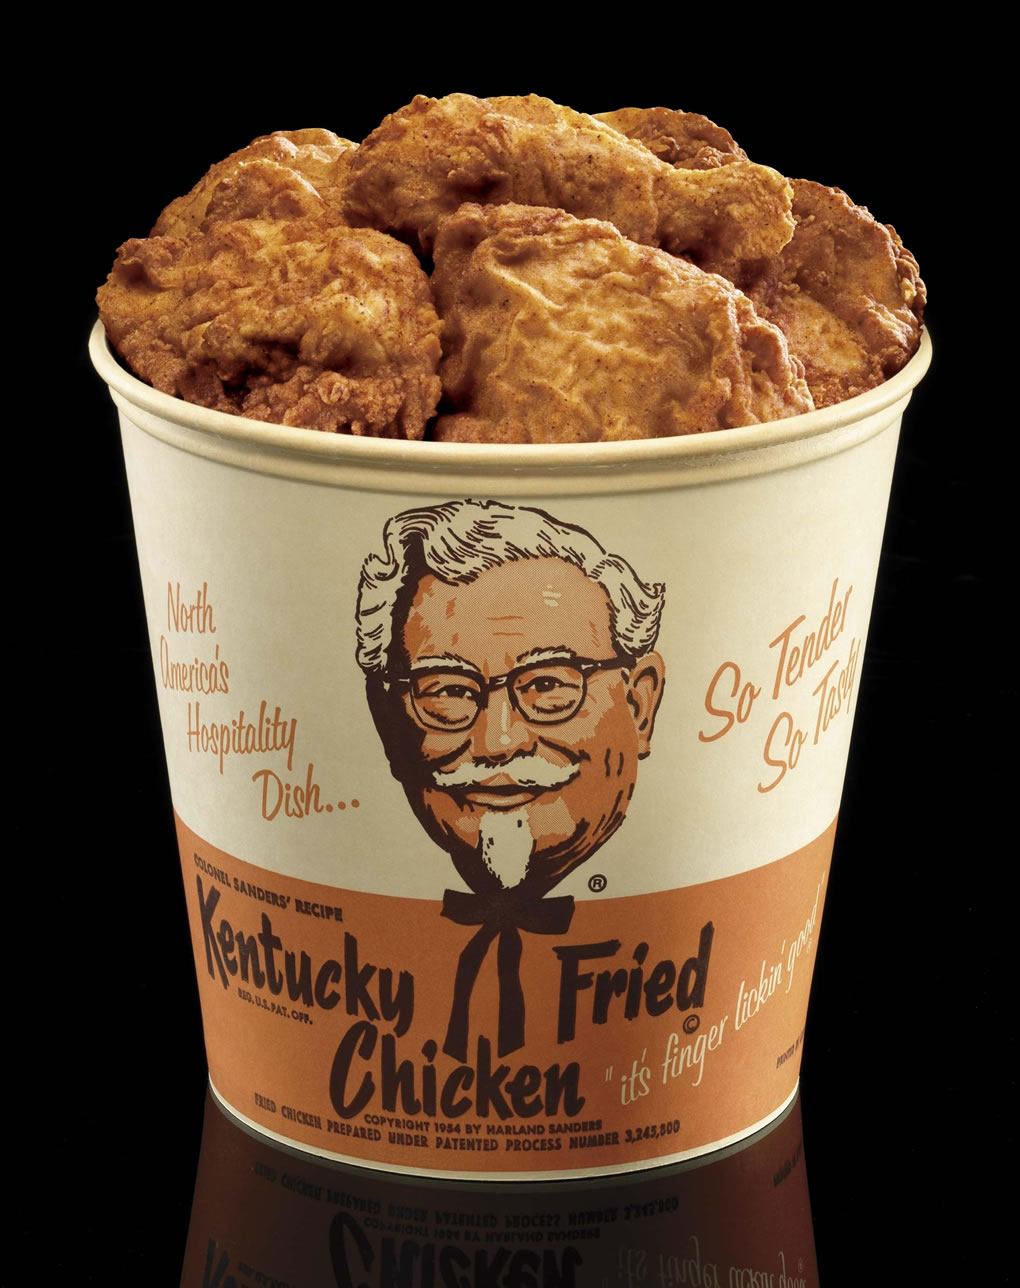 Largest serving of fried chicken - world record set by KFC